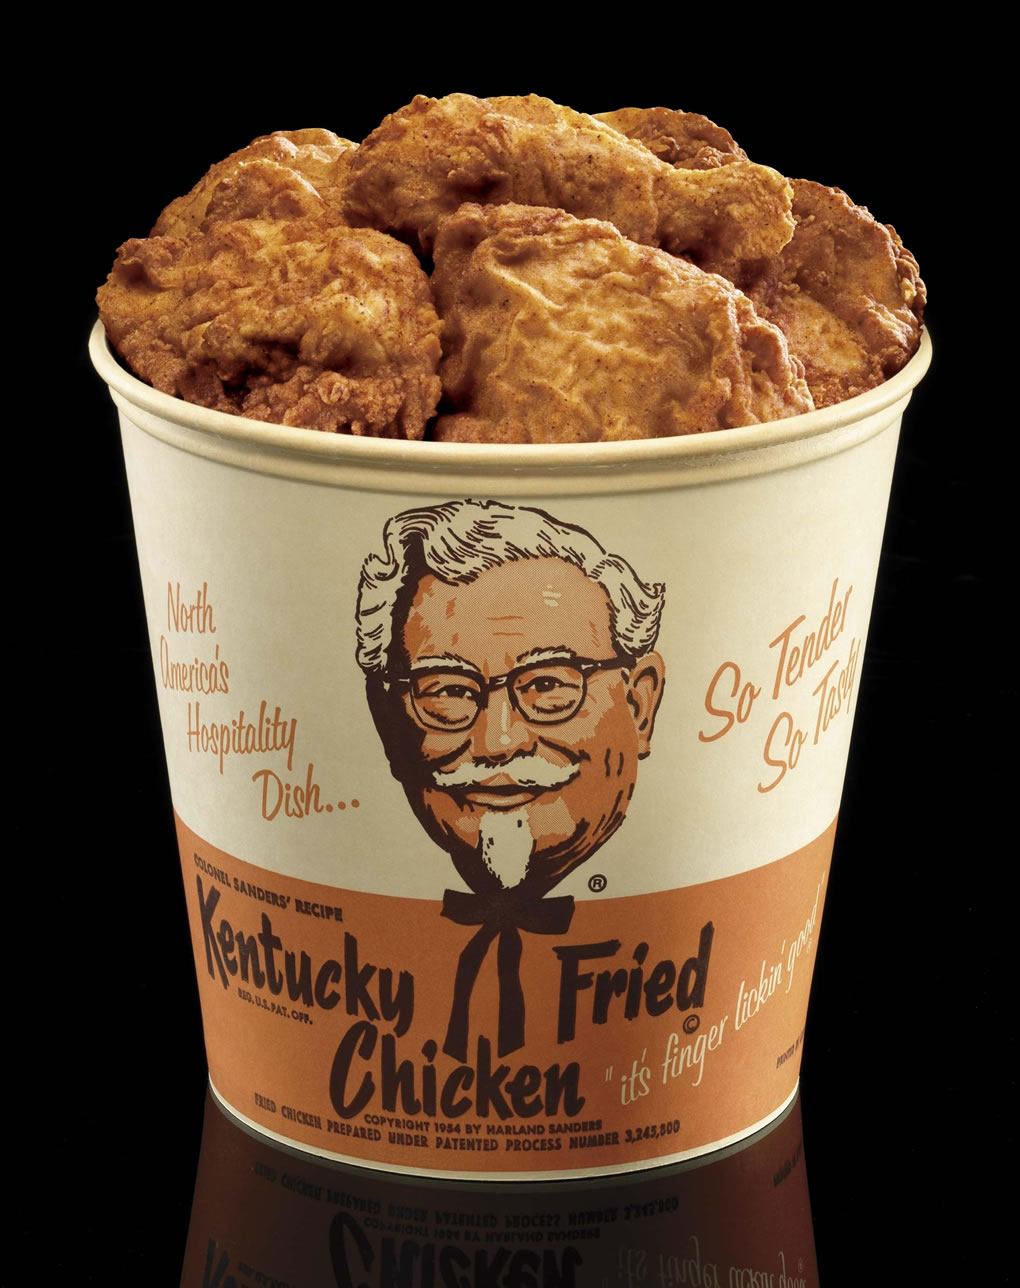 Largest serving of fried chicken - world record set by KFC